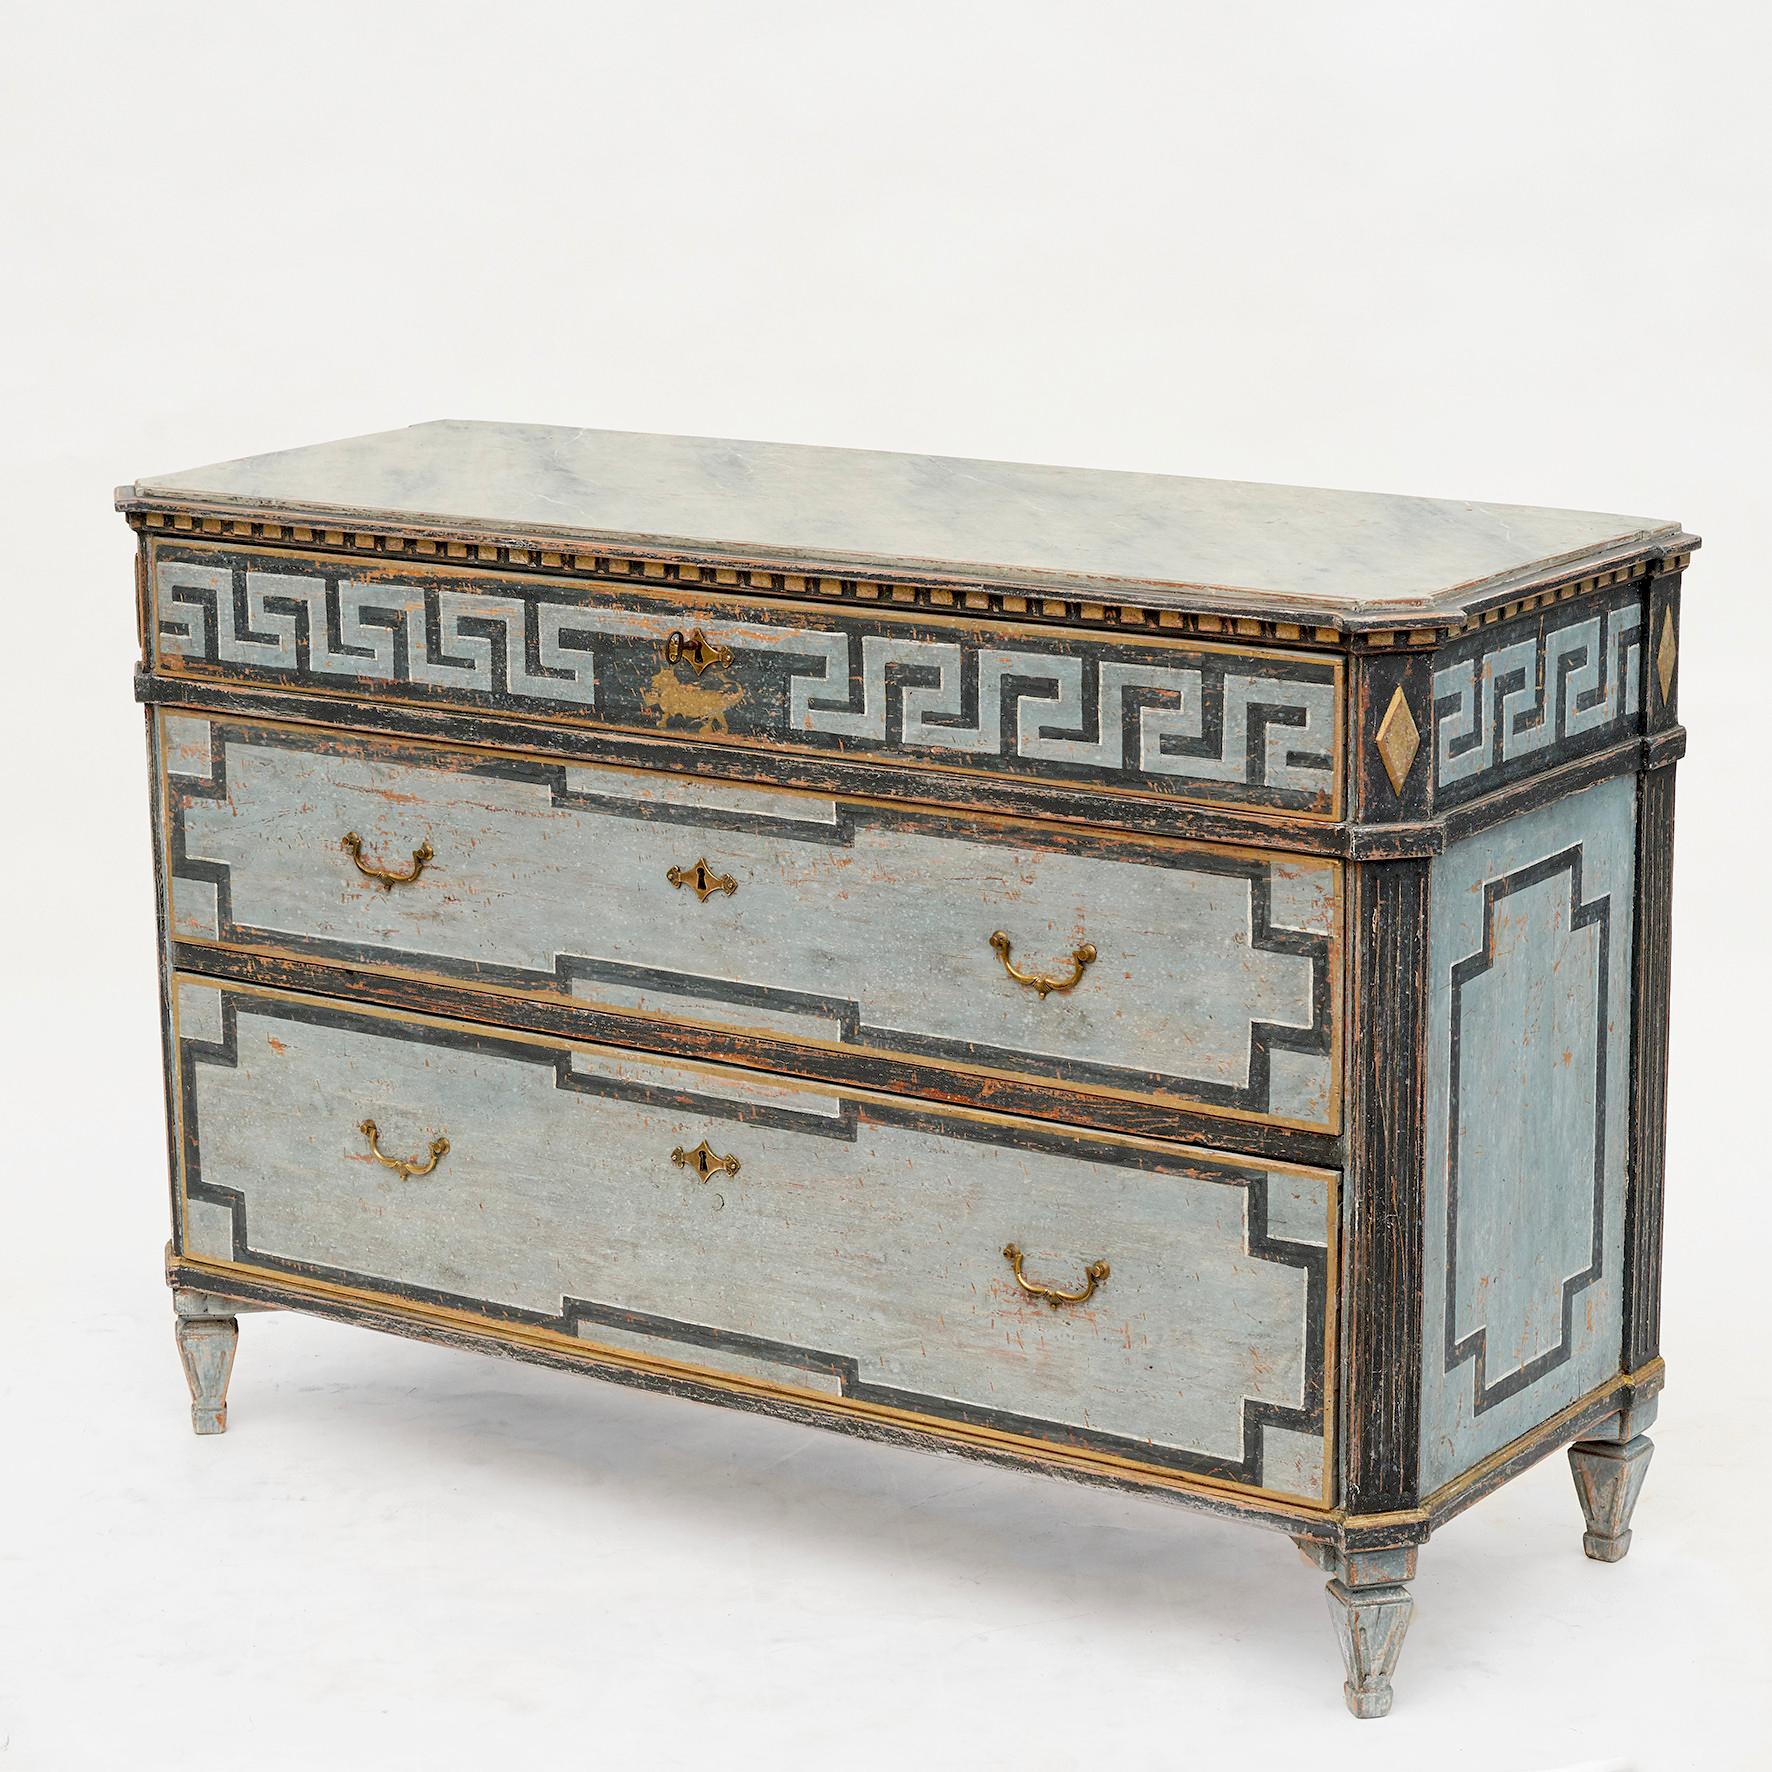 Chest of drawers, Gustavian style. Painted in blue shades. Tabletop blue-gray marbled. Upper drawer with 'à la grecque' motif. Original spring locks.
Sweden, 1820-1840. Very decorative.